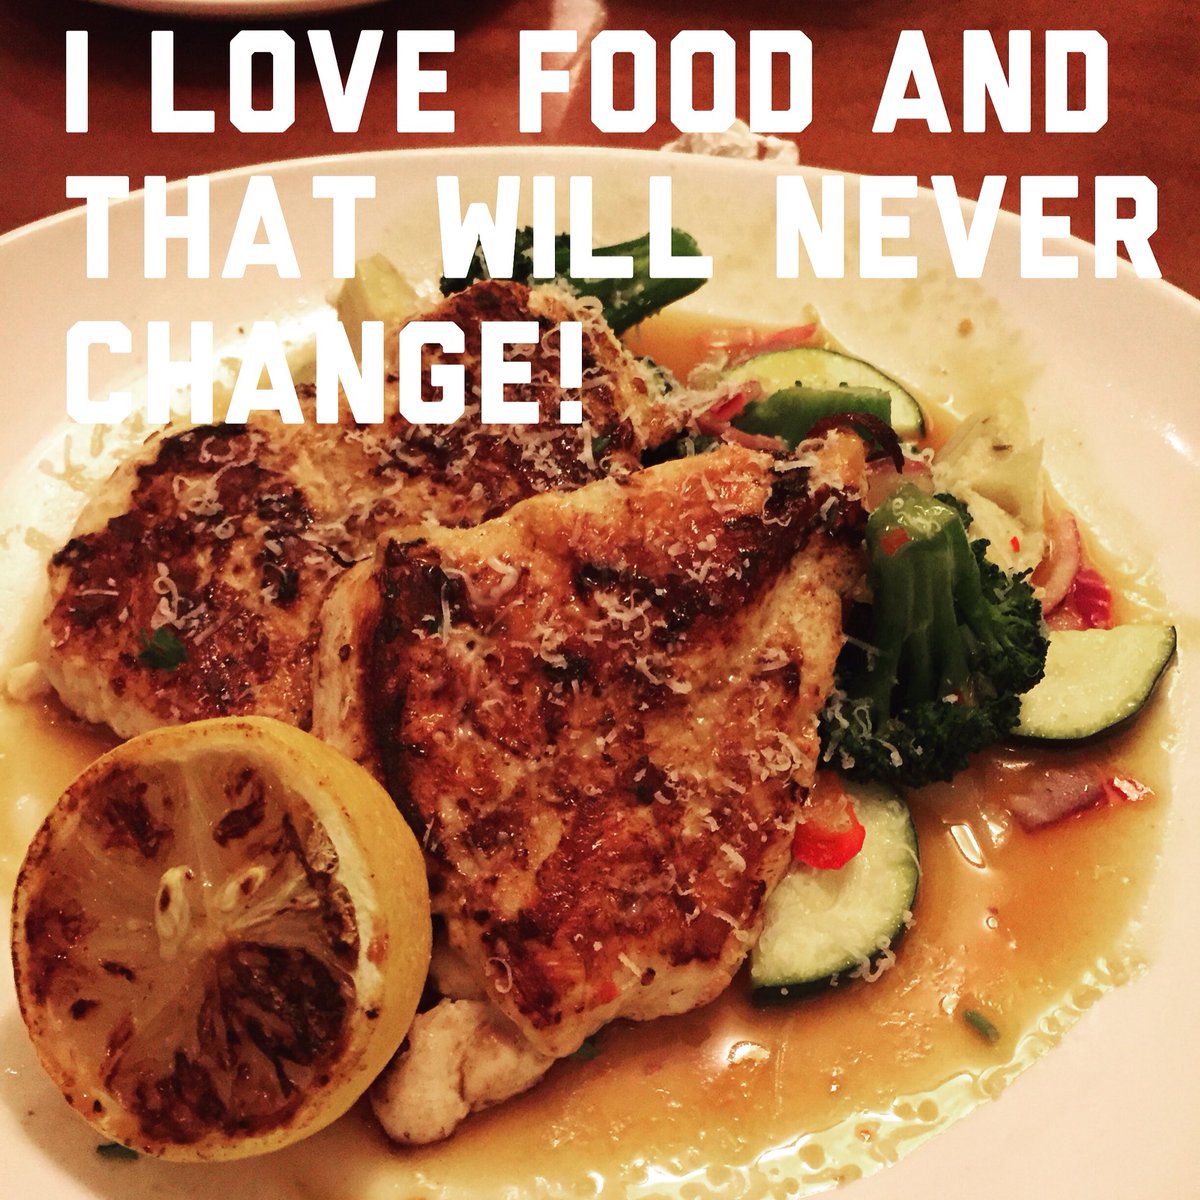 I love food and that will never change!! #foodlovers #foodphotography #yummychicken #veggies #ilovemyfood #foodlover